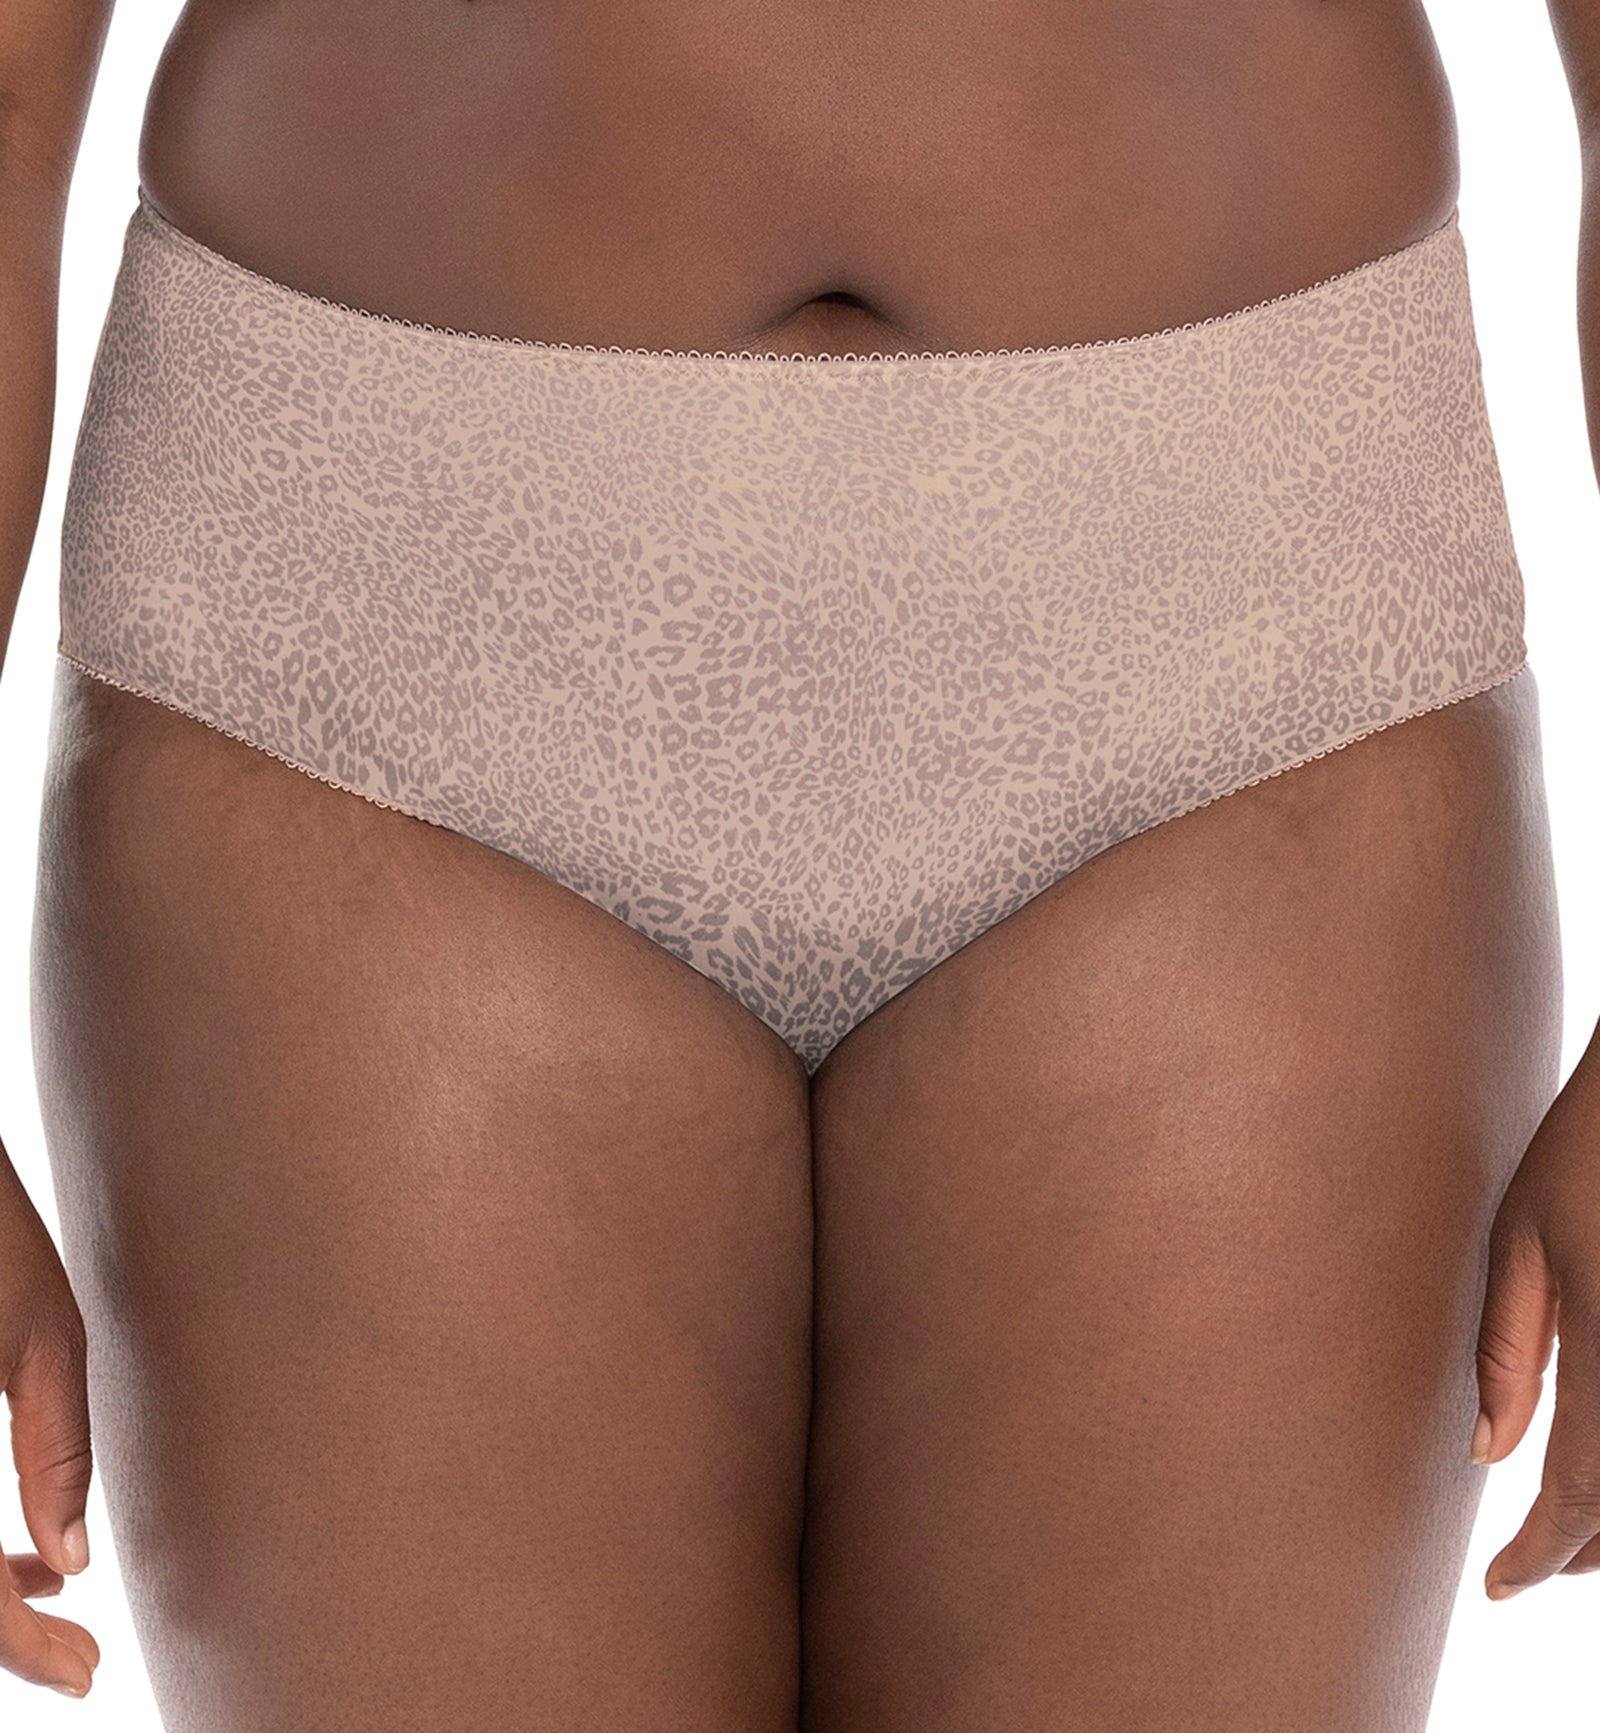 Goddess Kayla Matching Brief (6168),Large,Taupe Leopard - Taupe Leopard,Large